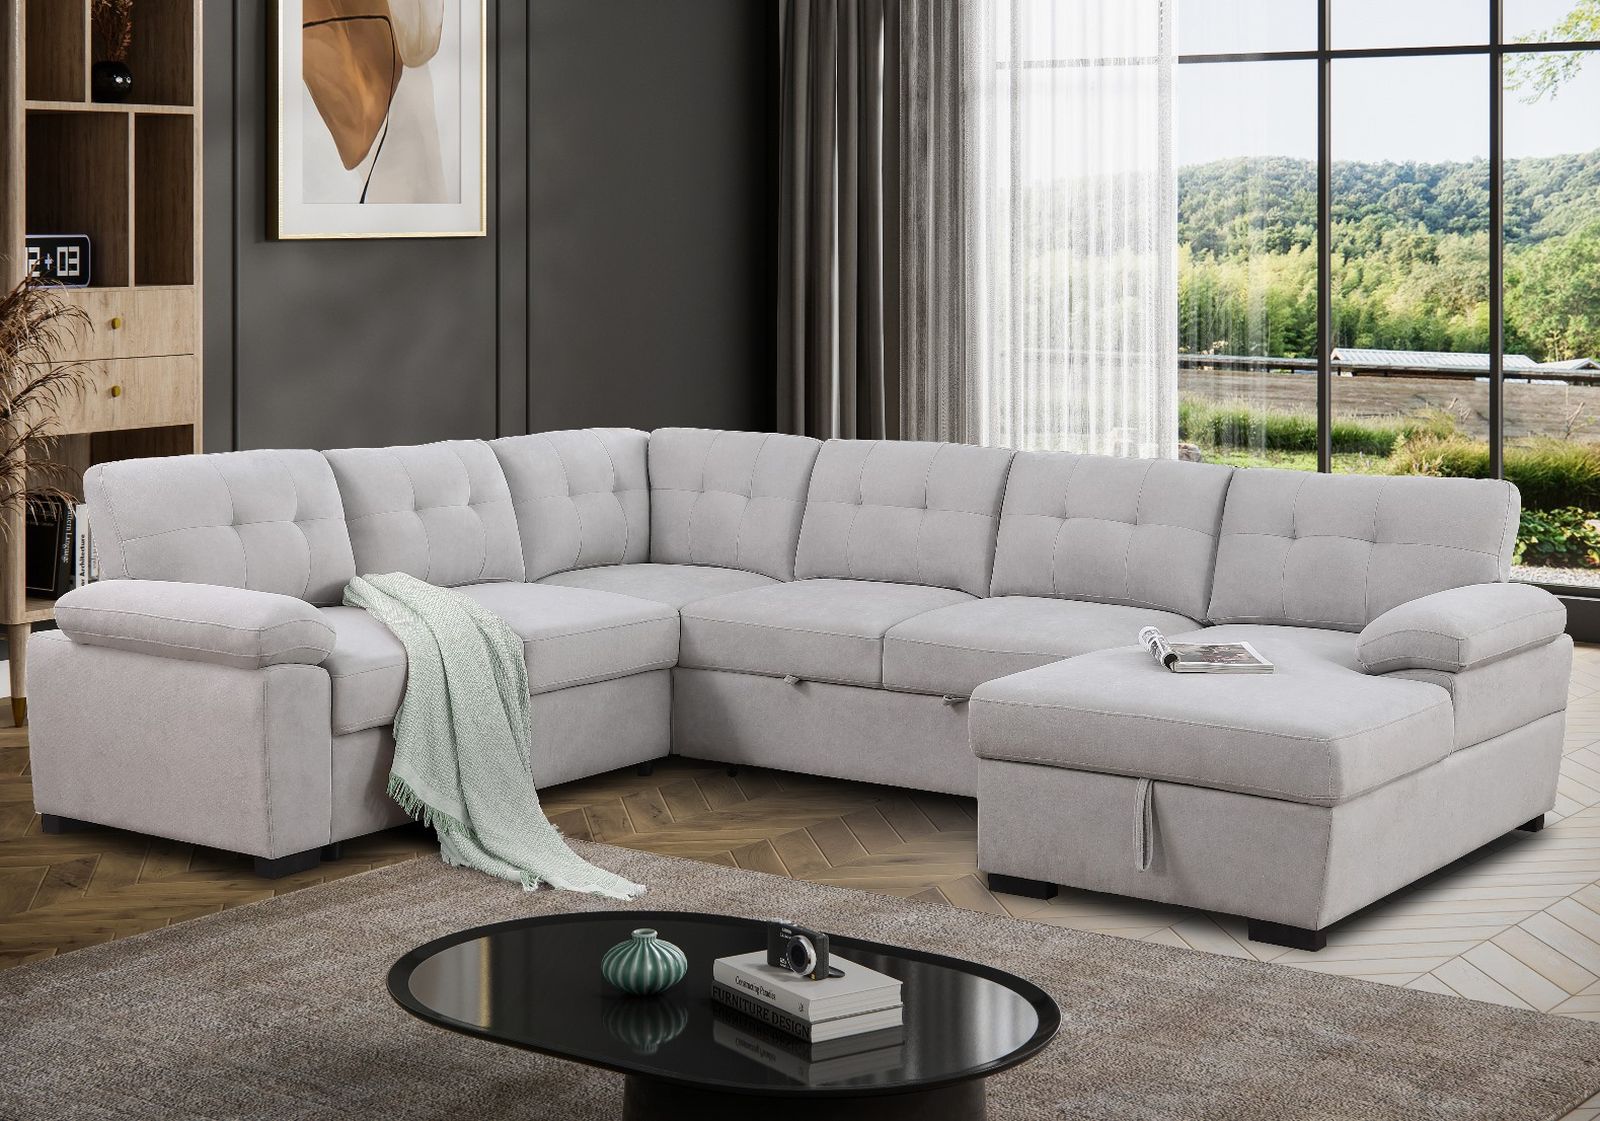 !New!!! Gray Sectional Sofa With Storage Chaise, Sectional Sofa Bed, Sofa With Pull Out Bed, Large Sectional, Sectionals, Sectional Couch, Sofa, Couch